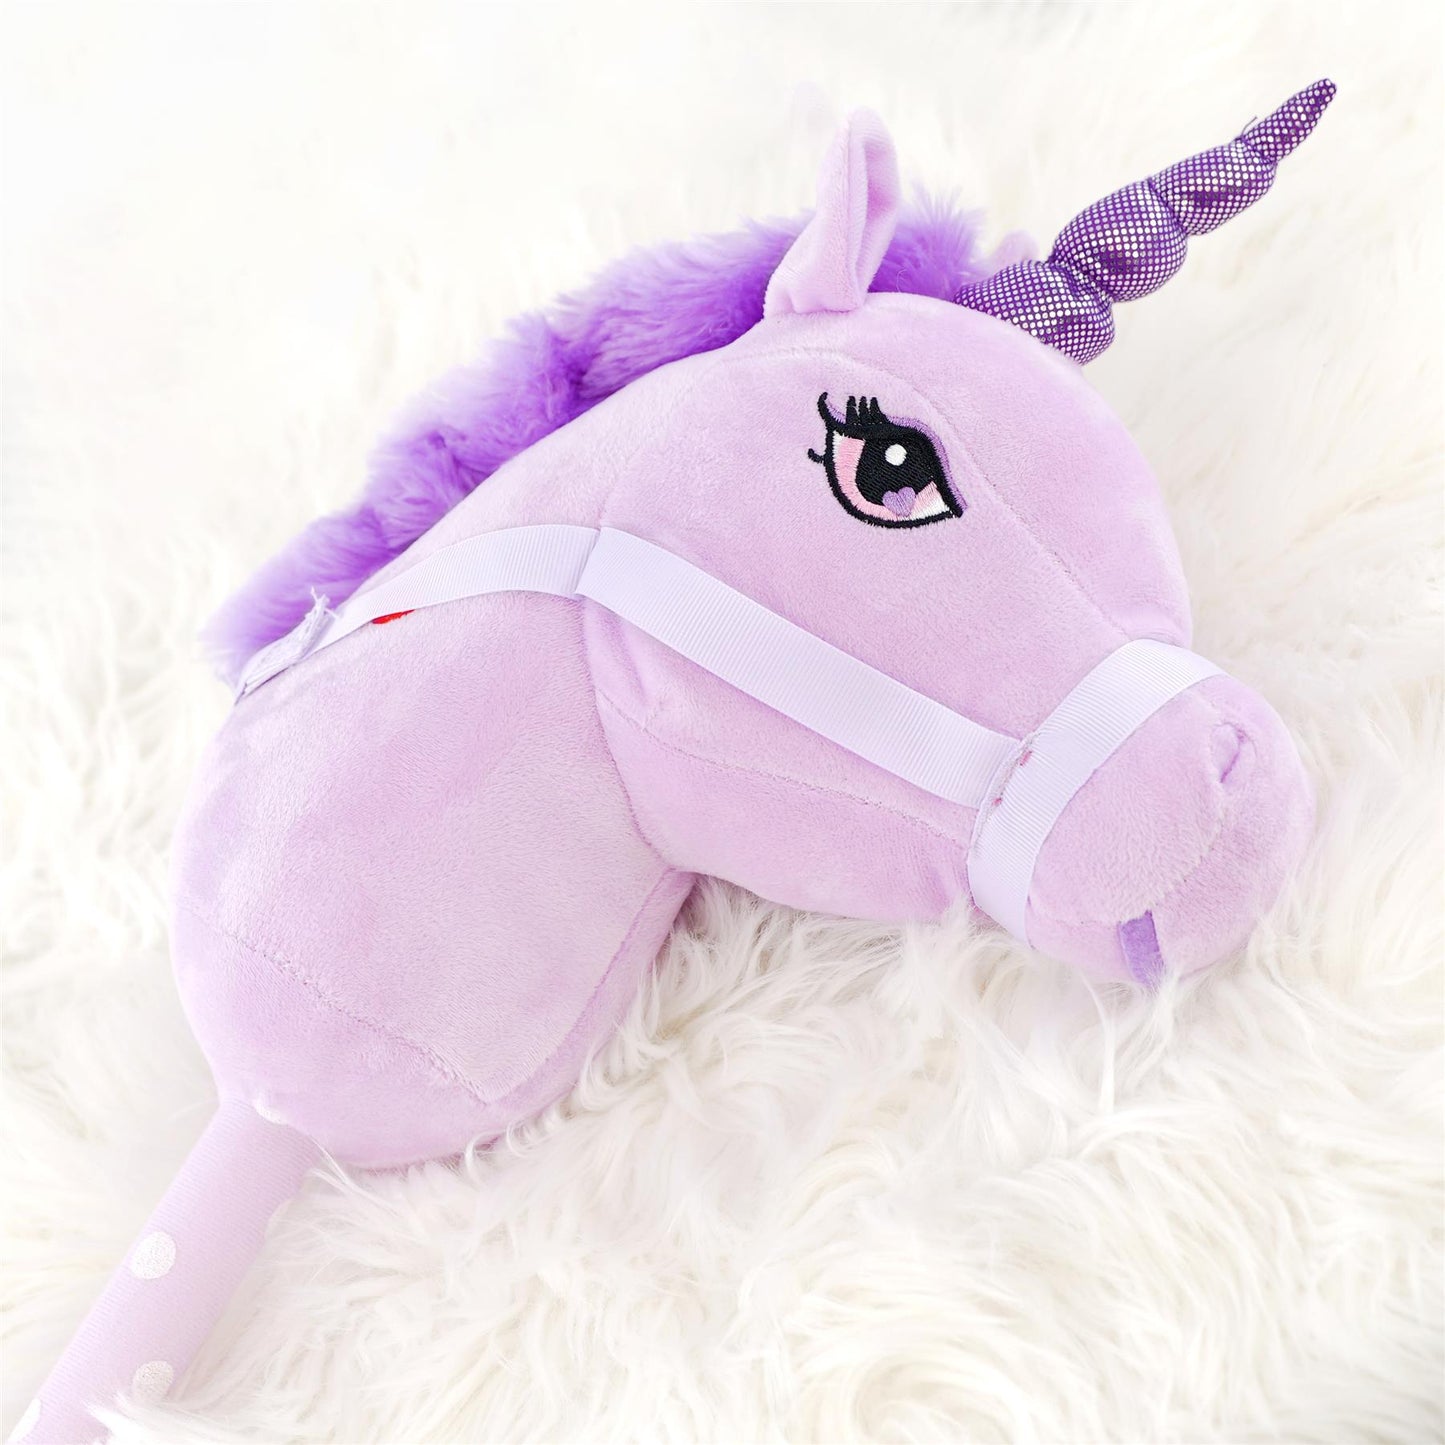 Lilac Hobby Horse by The Magic Toy Shop - UKBuyZone